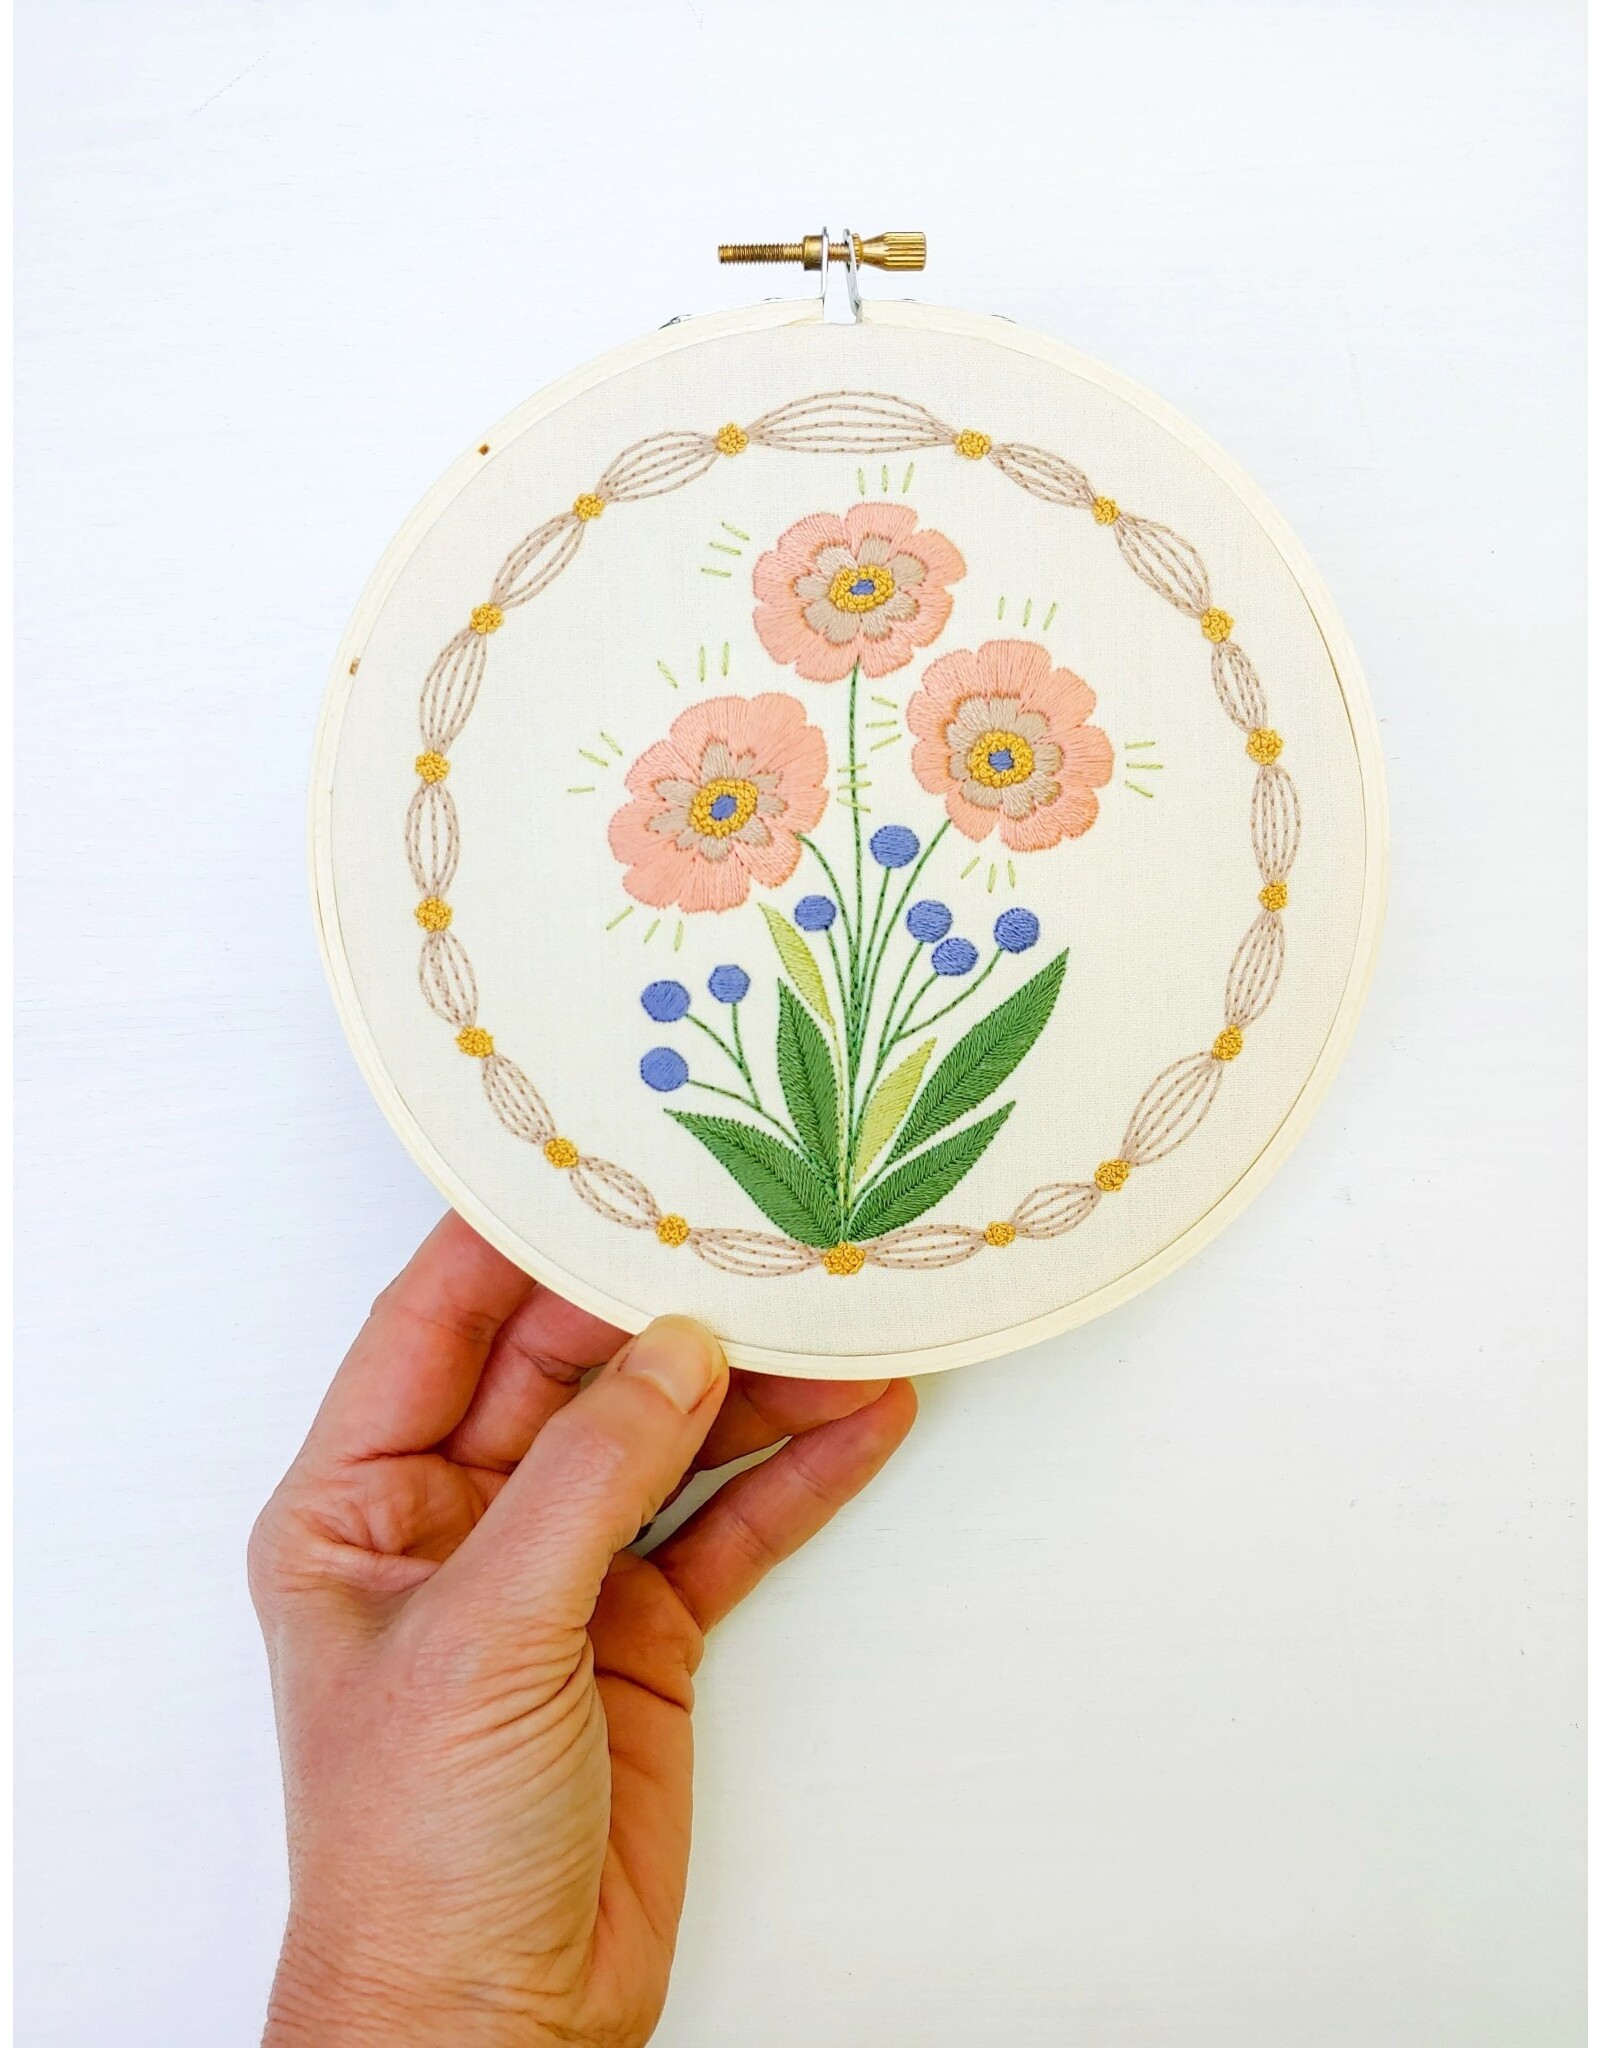 cozyblue True Bloom Embroidery Kit from cozyblue